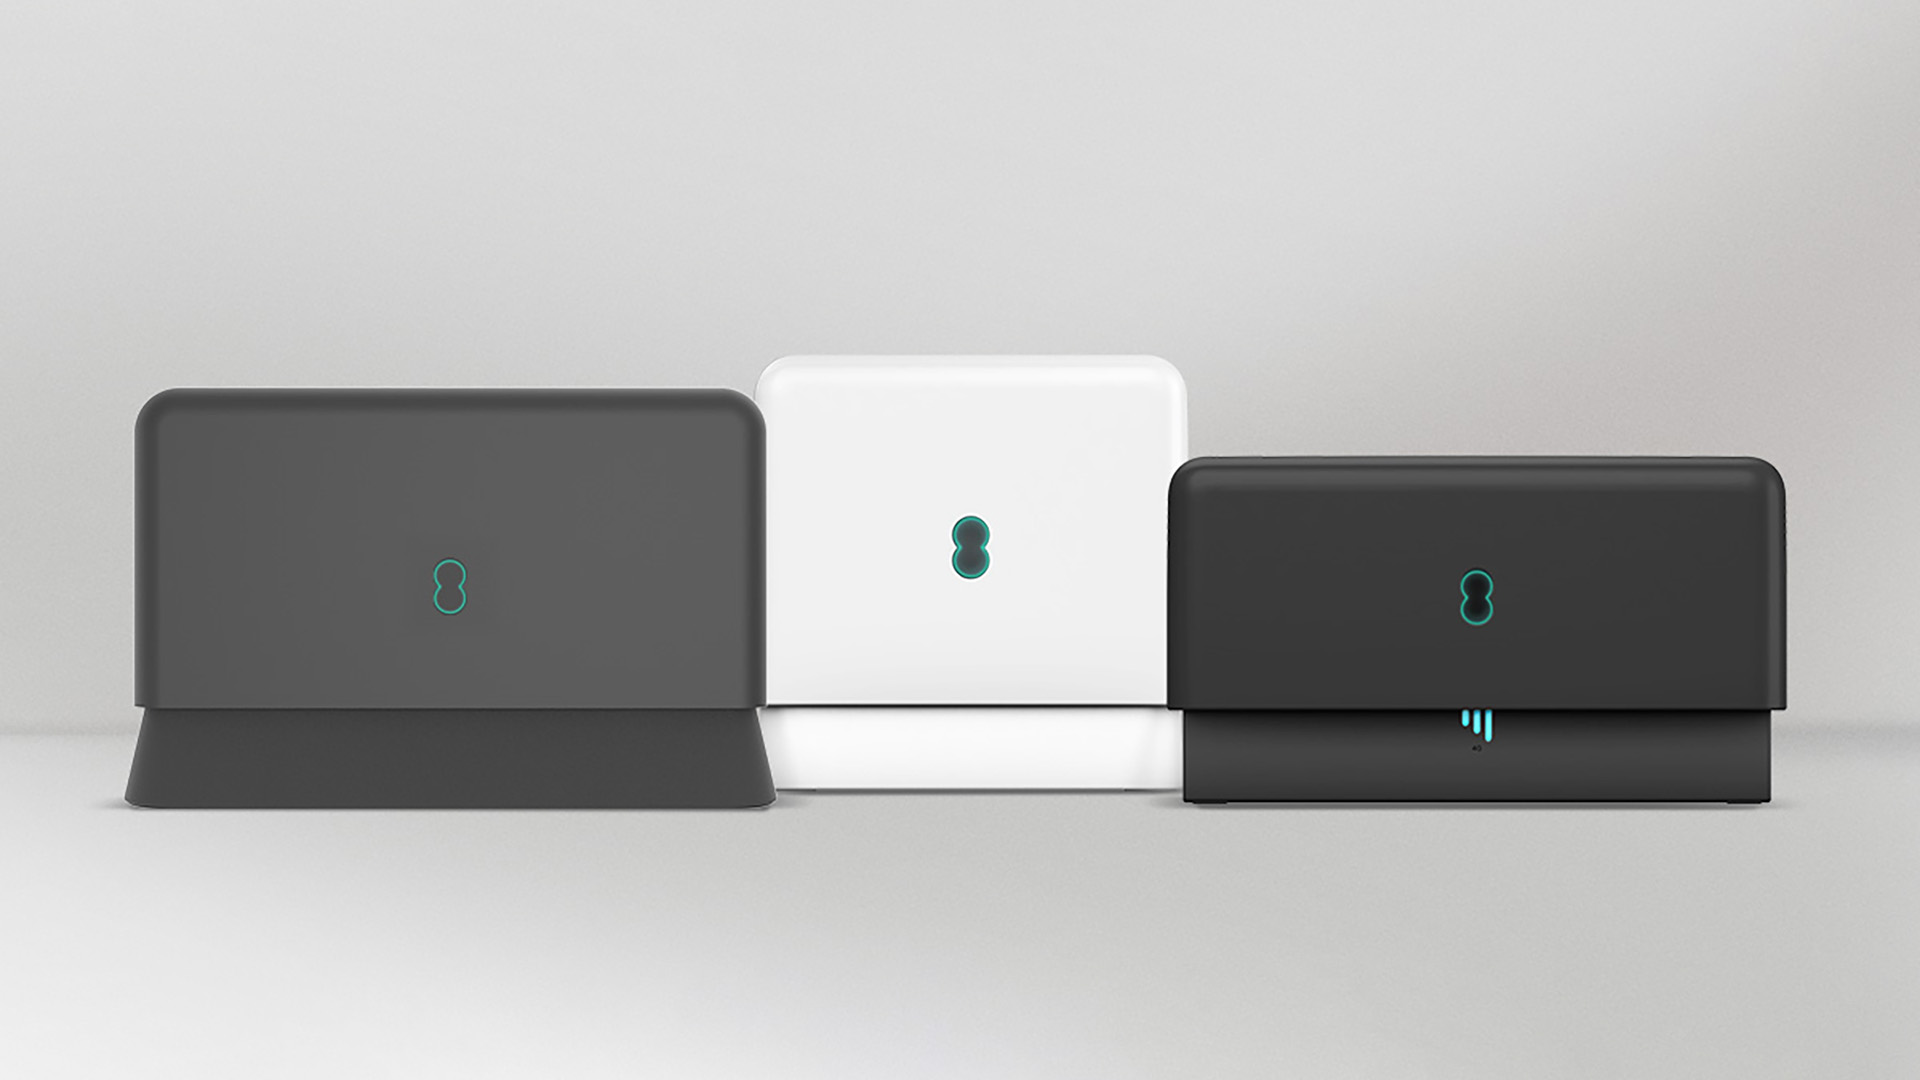 EE's new 1.6-gig broadband will make your Wi-Fi move like lightning | T3